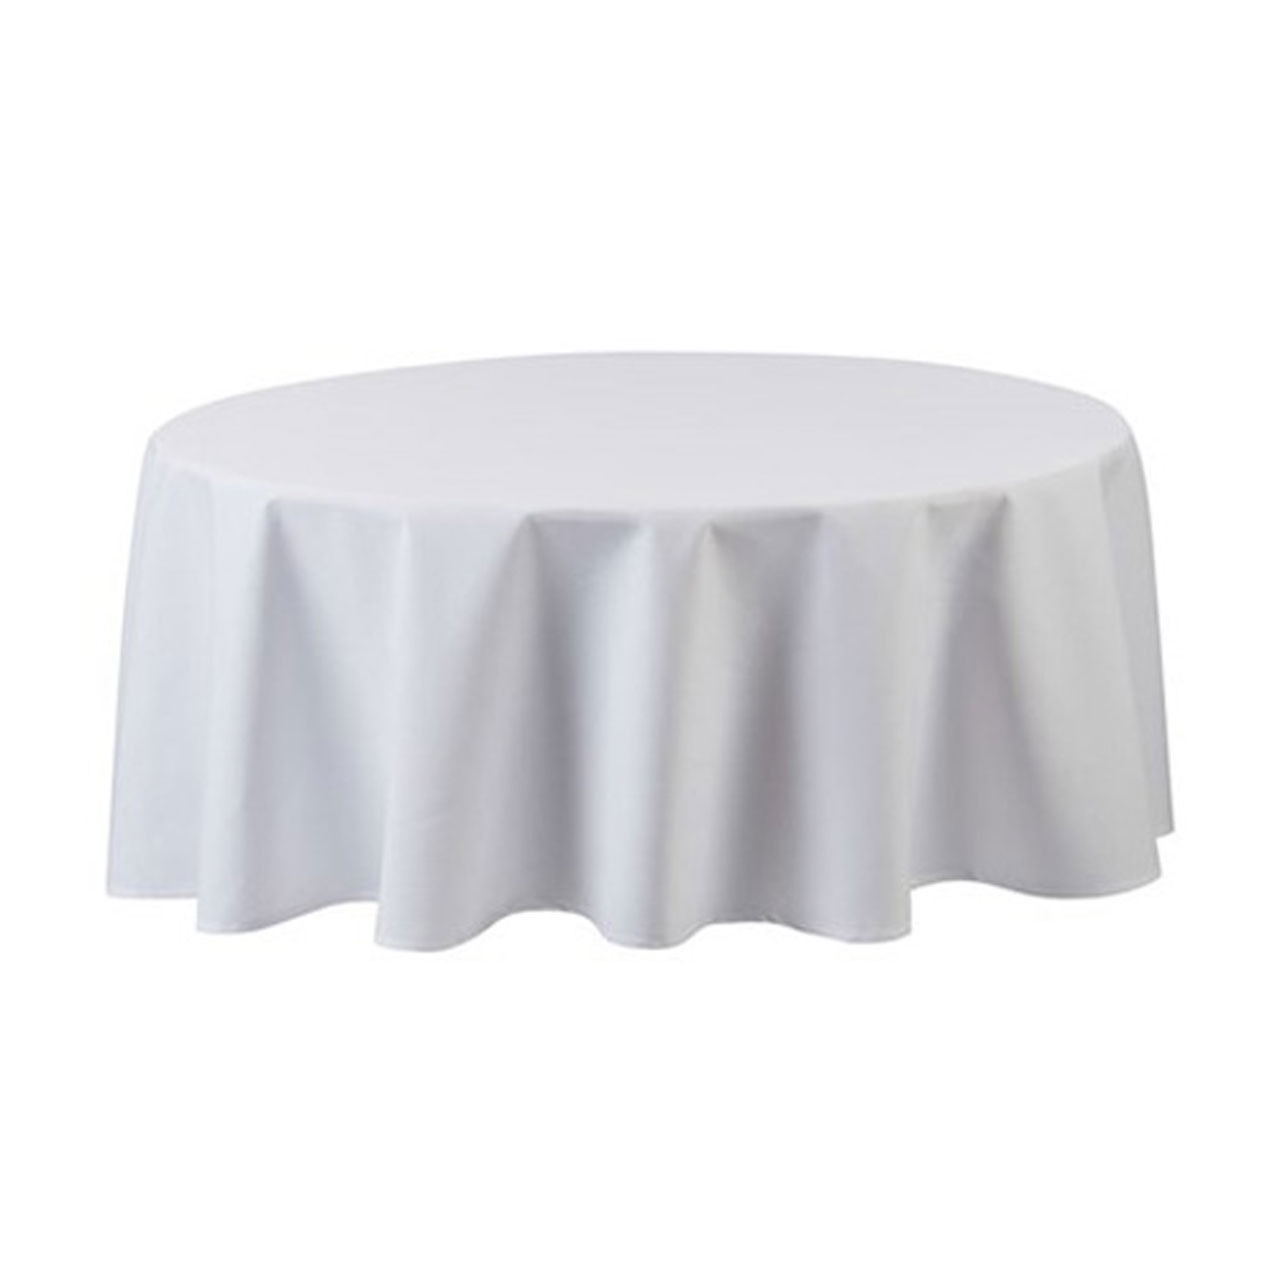 Can you specify the color and weight of the 90 round tablecloth in white?